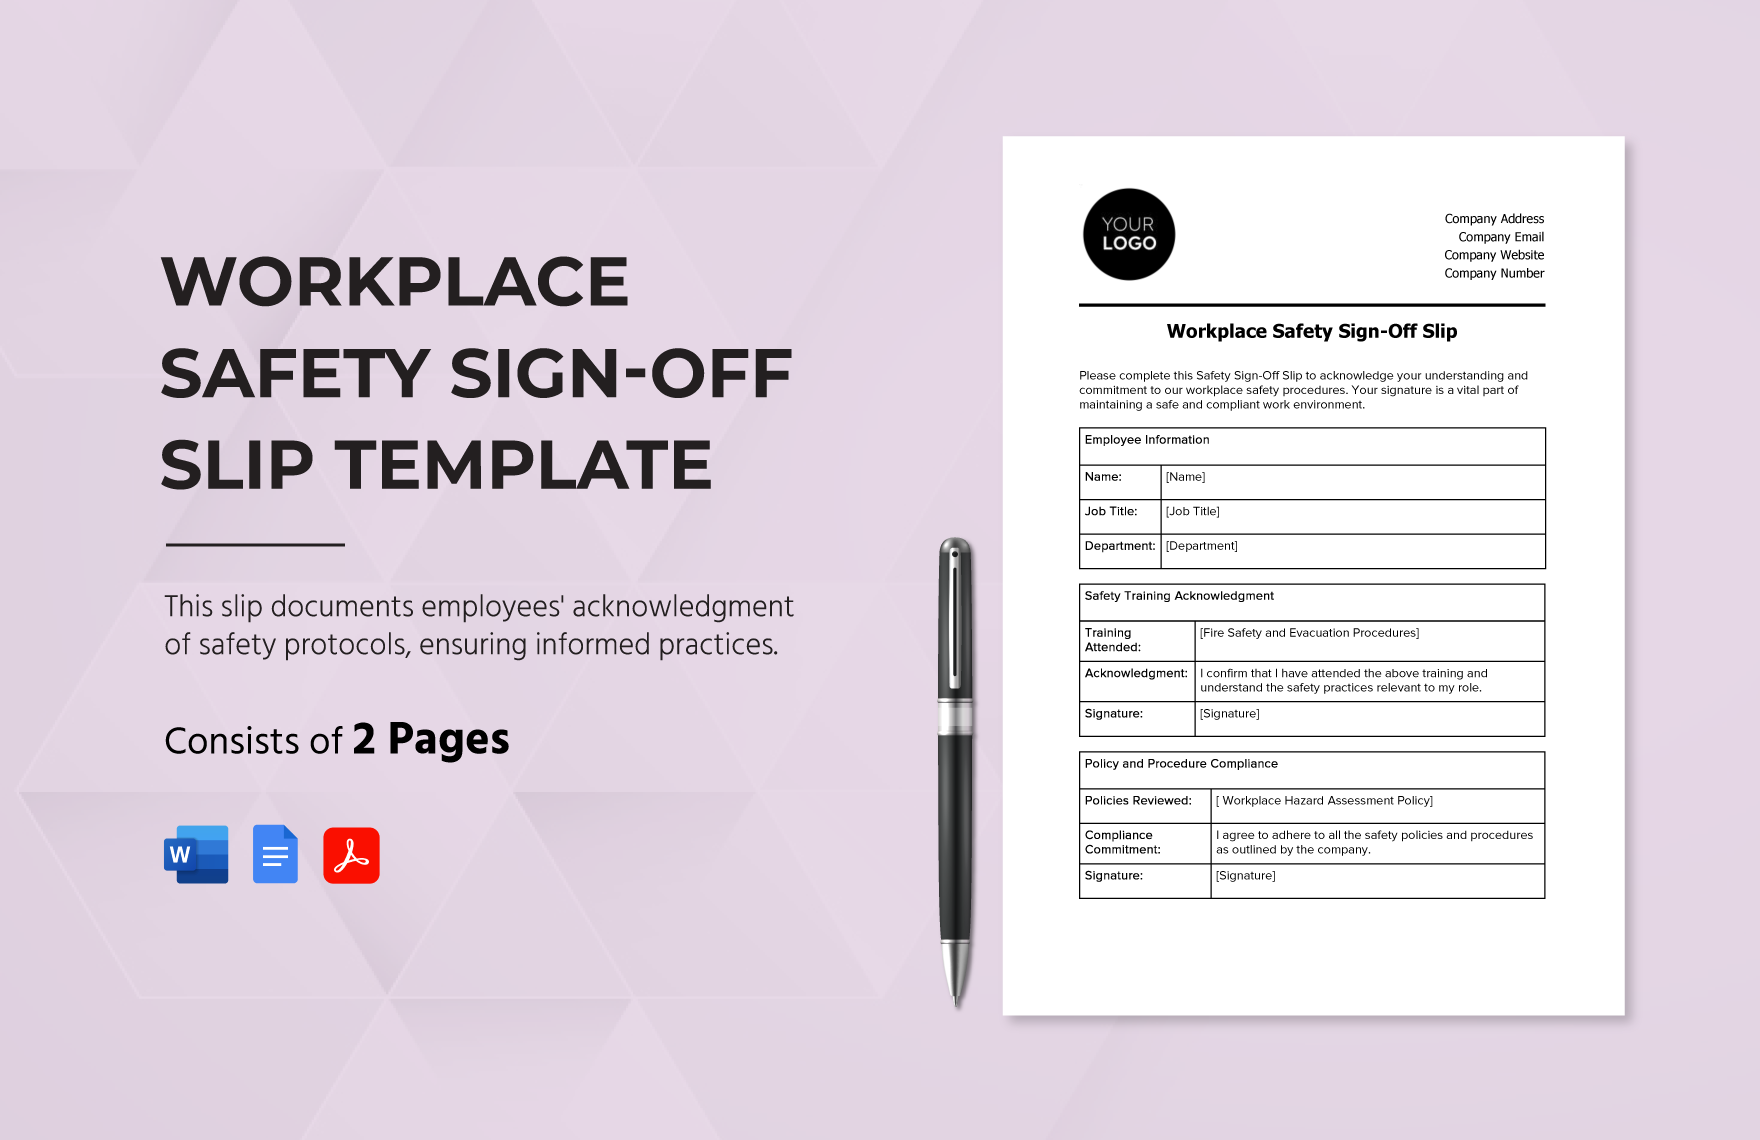 Workplace Safety Sign-Off Slip Template